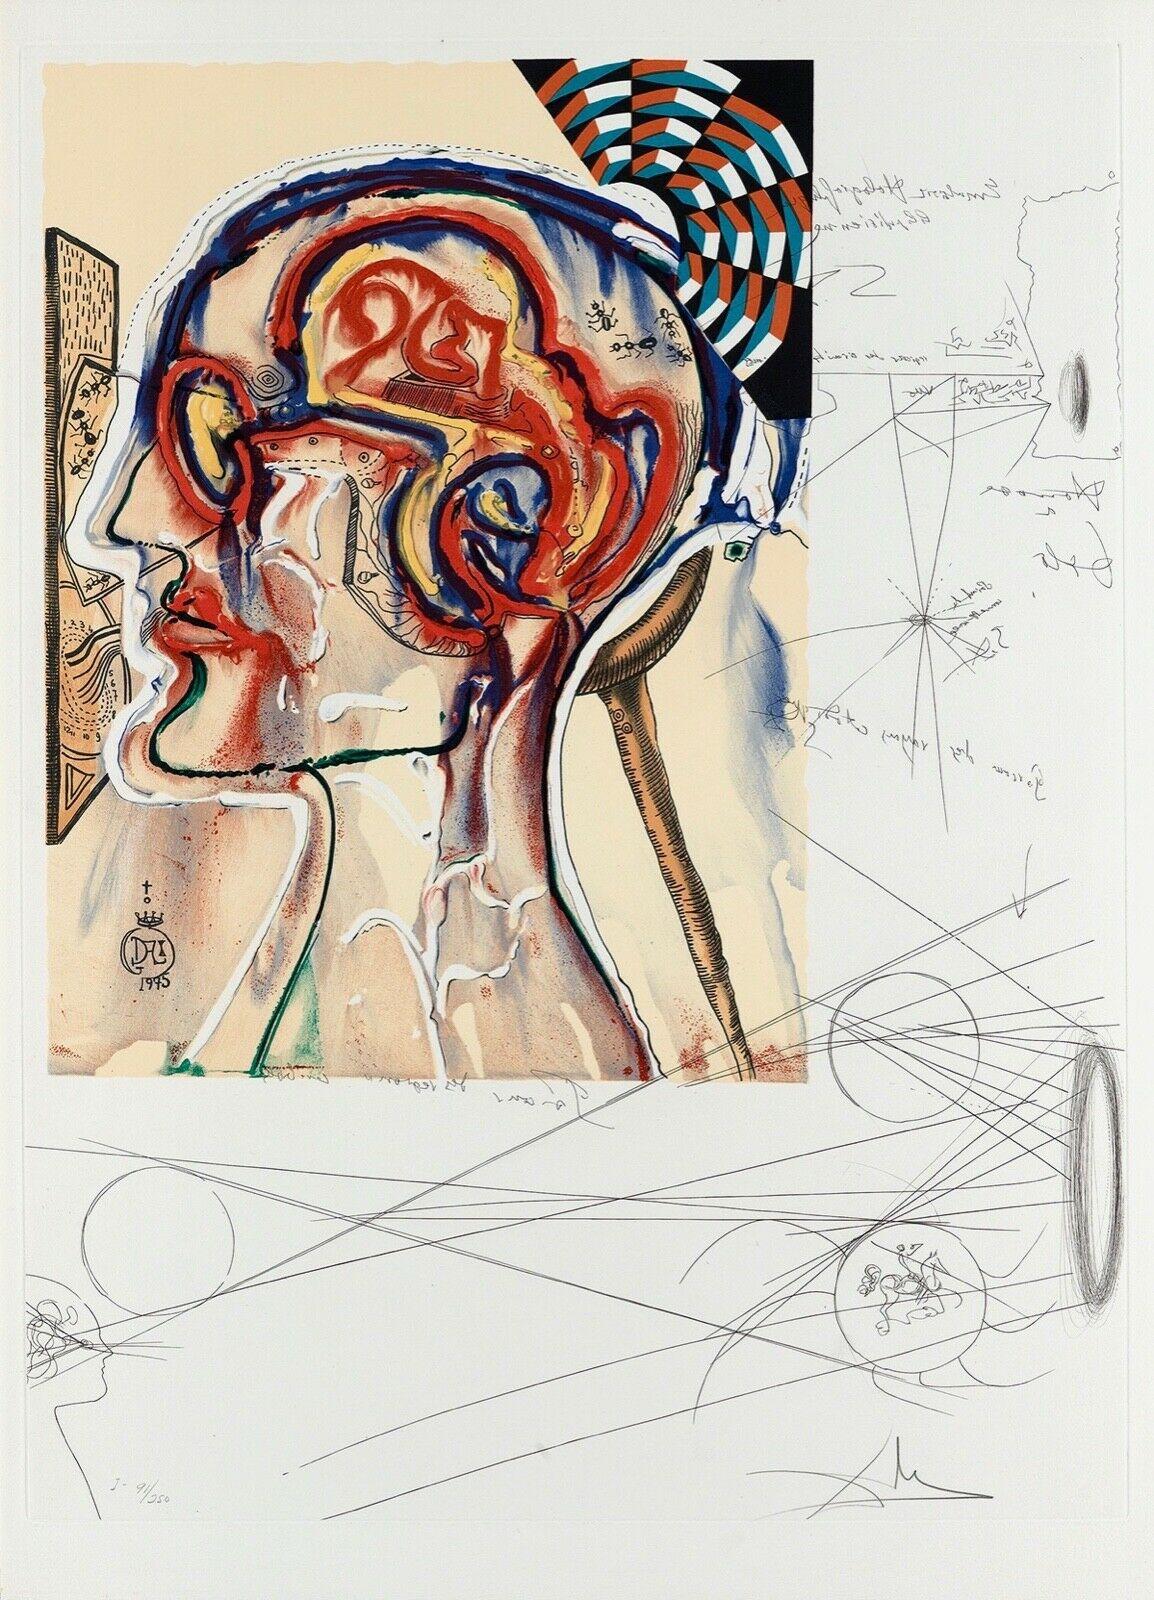 Salvador Dalí Abstract Painting - Spectacles with Holograms & Computers, Limited Edition Lithograph, Salvador Dali